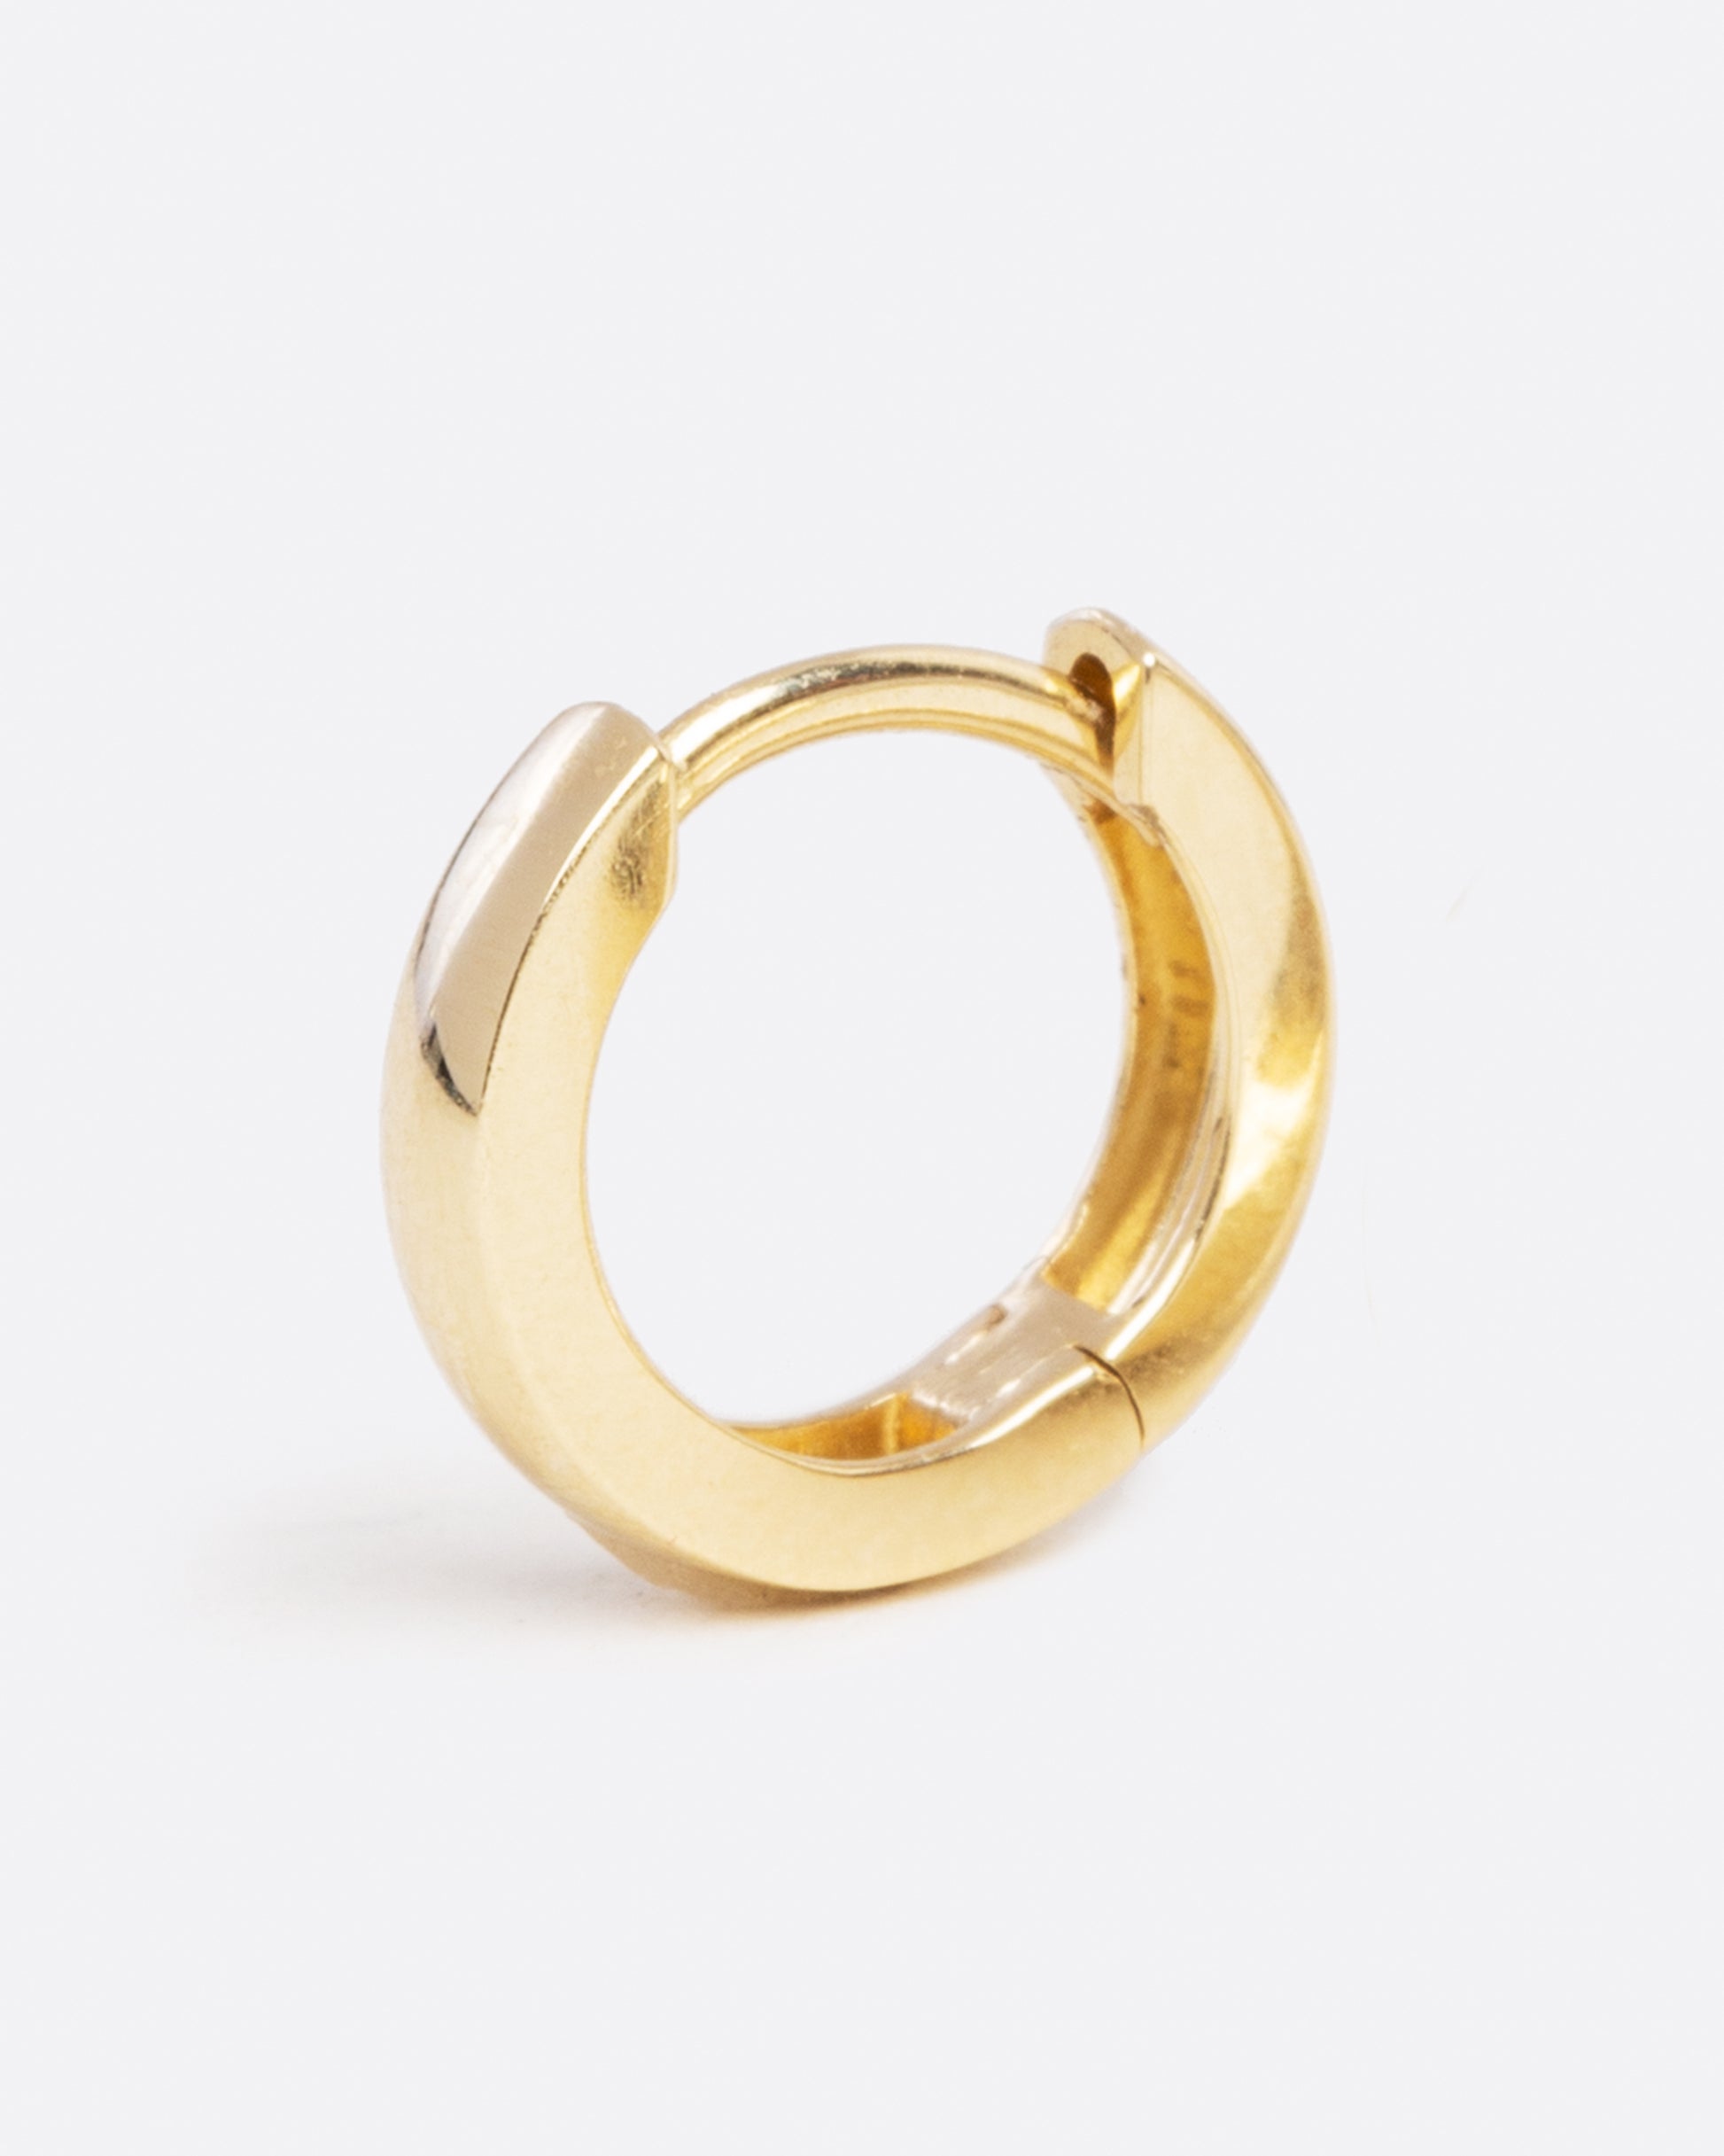 a tiny yellow gold hoop earring with a hinge in the middle, shown closed